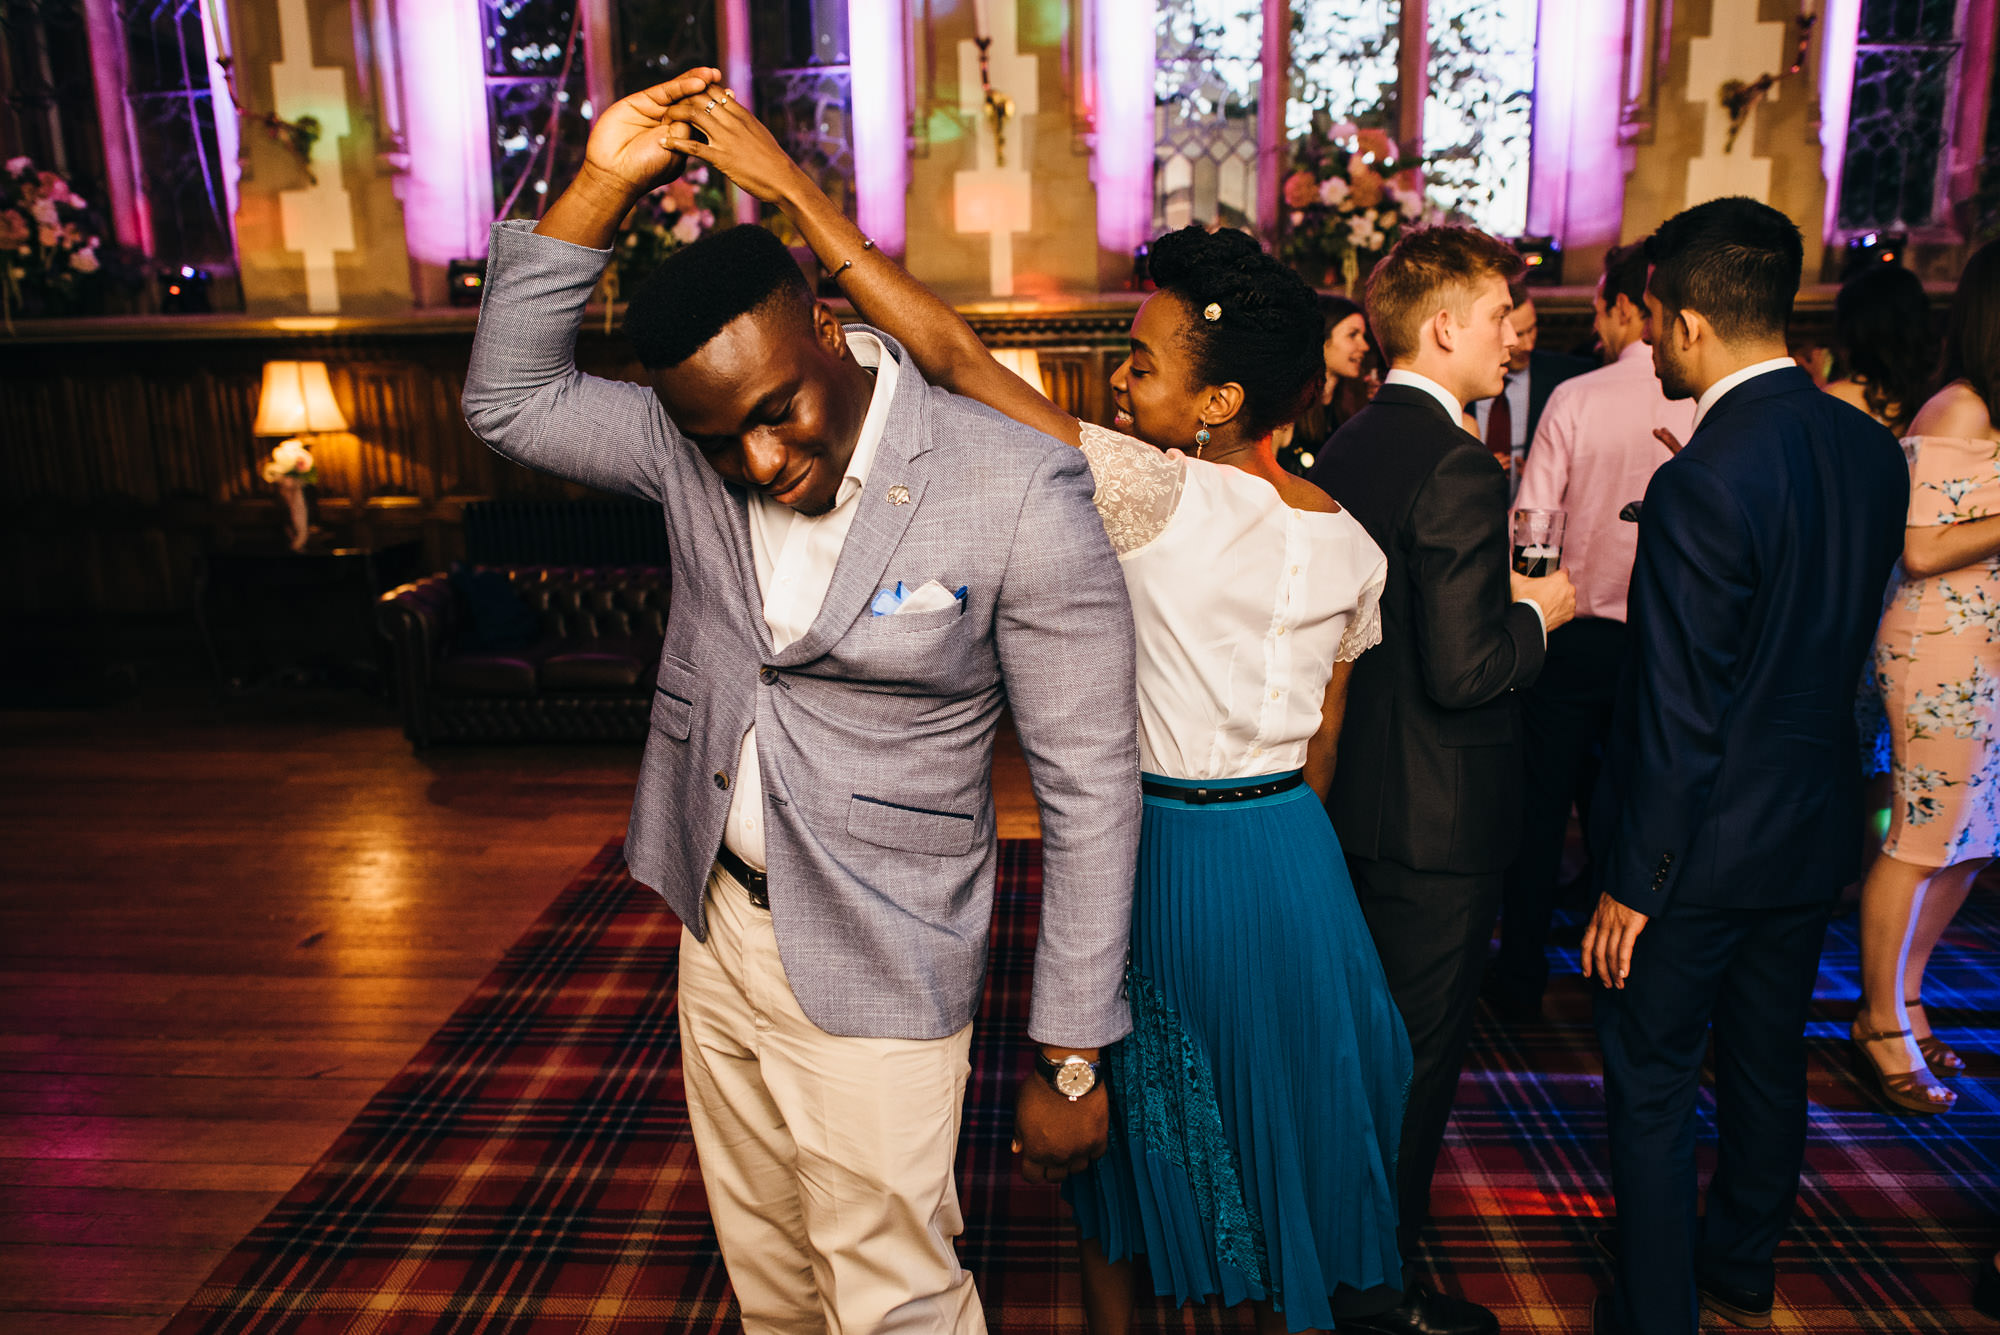 Dancing at St audries park wedding